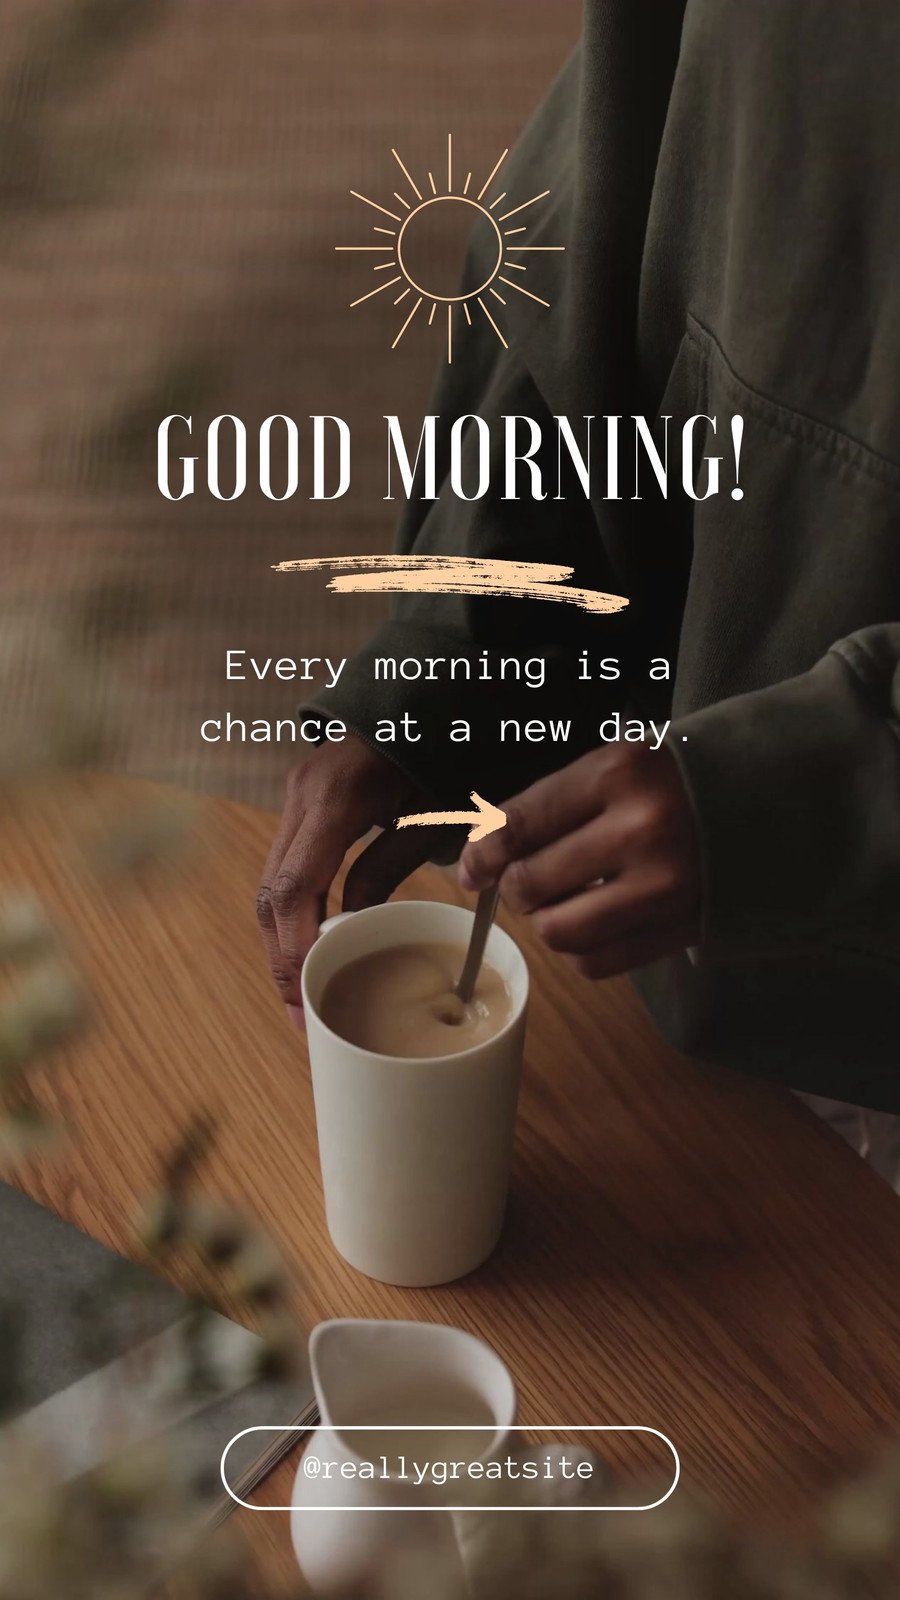 First, I need coffee. Good Morning - trendy coffee quote with